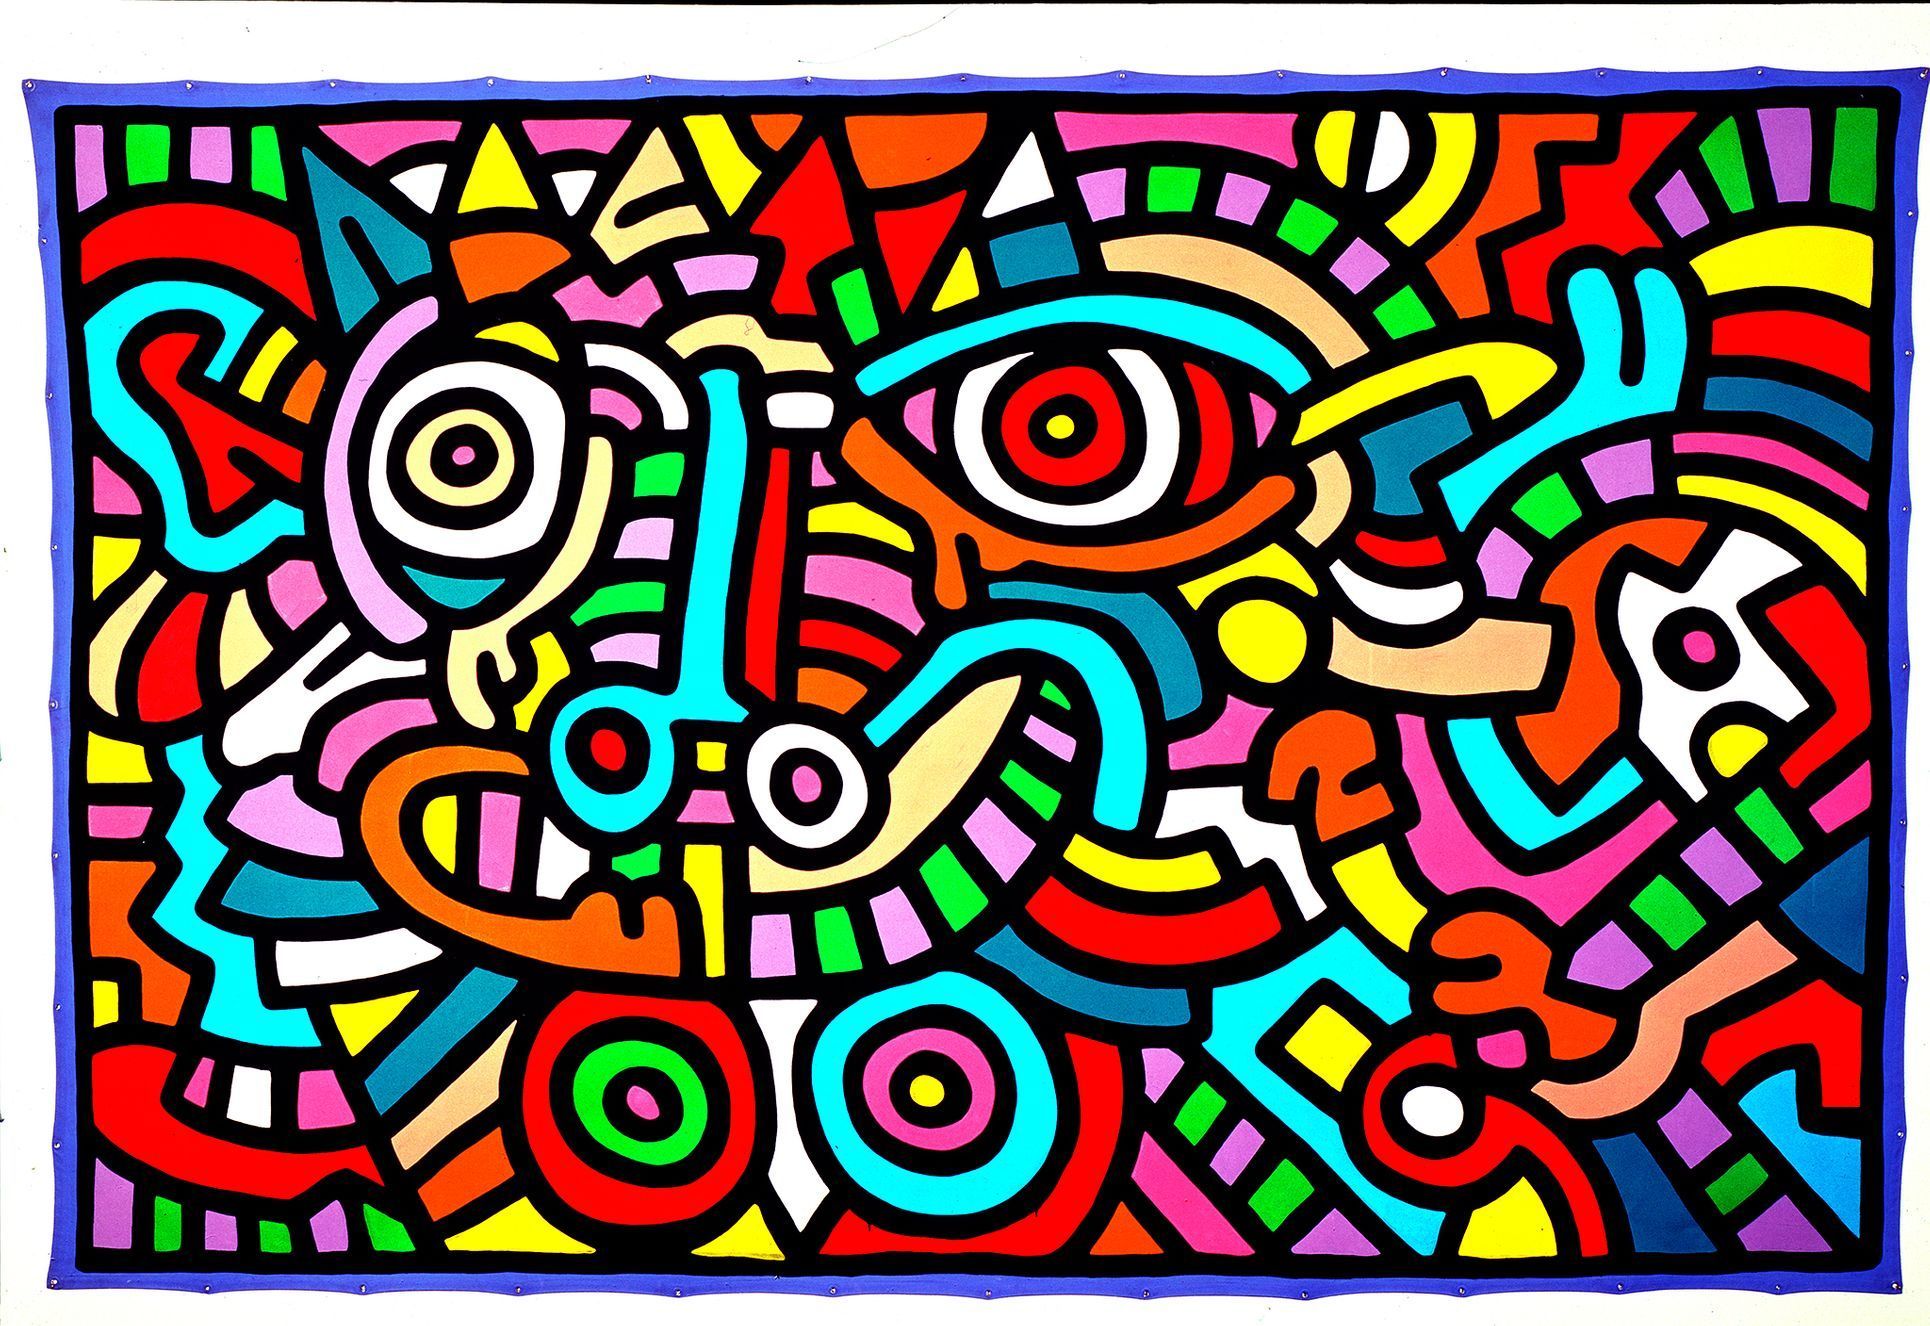 Keith Haring: Untitled, 1986